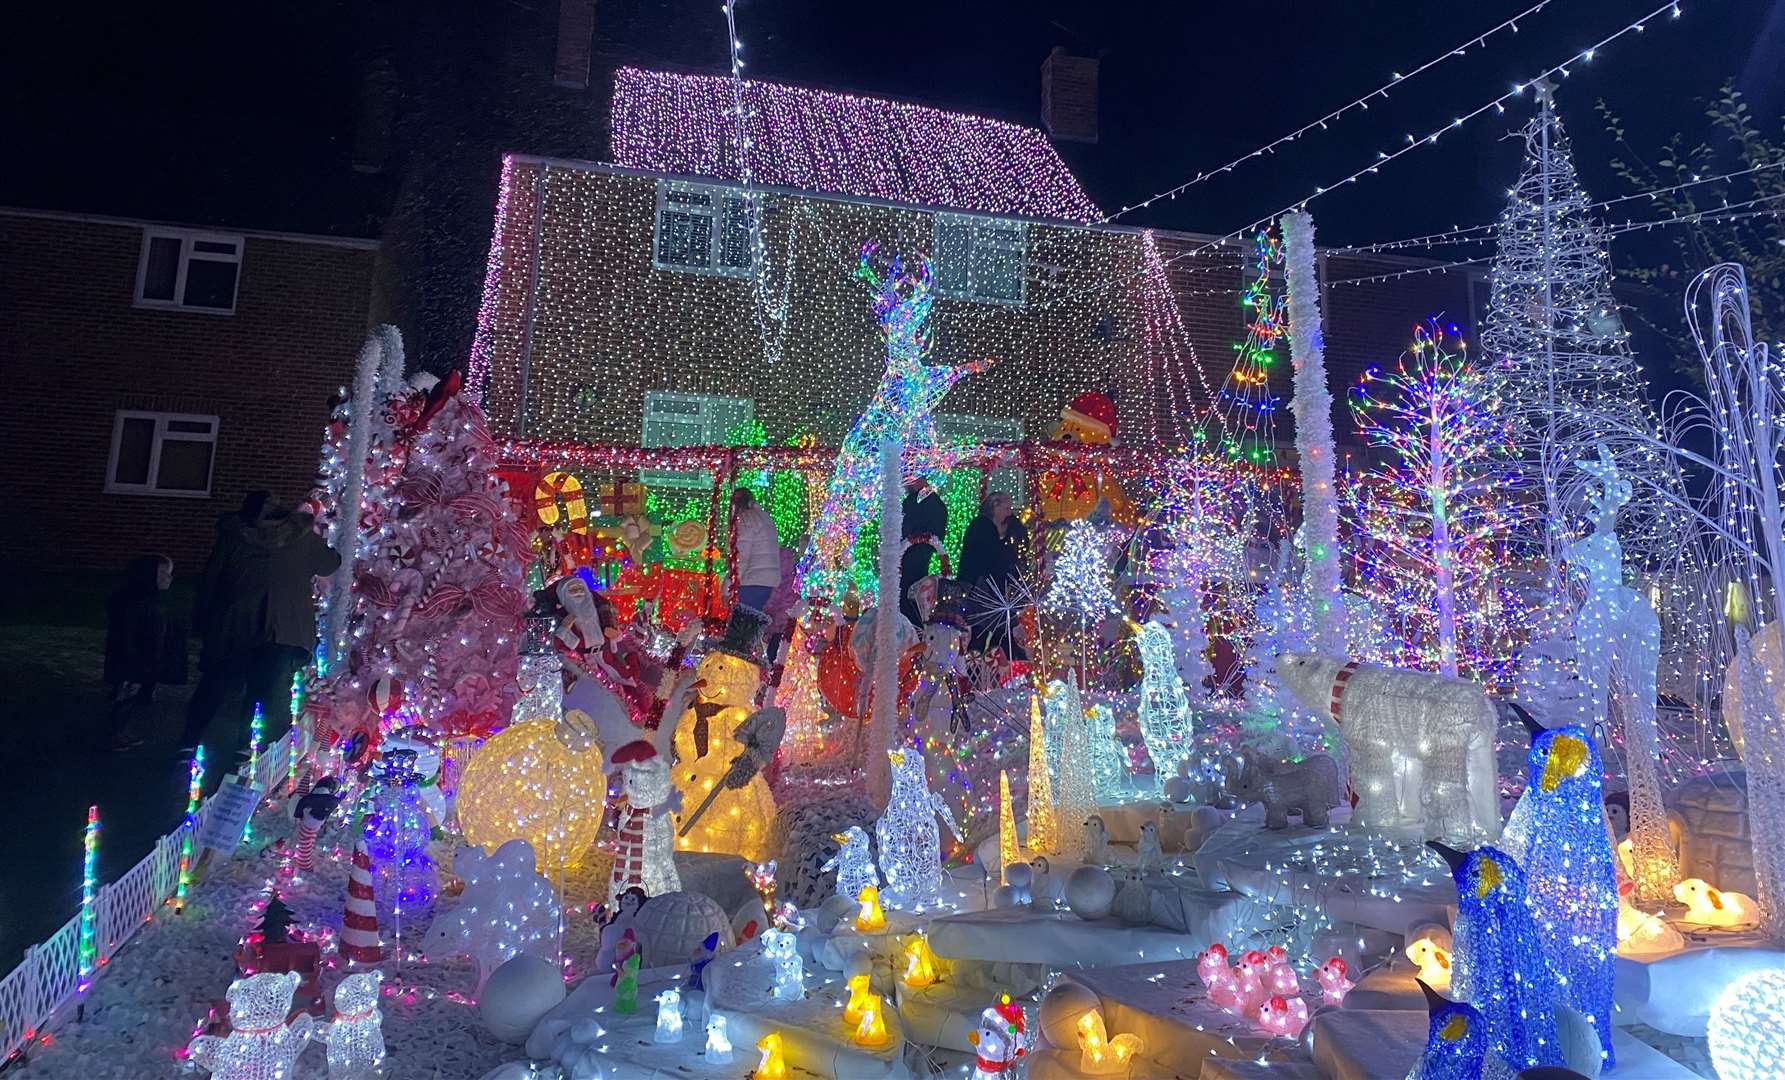 The Clark Christmas Display at Colonel's Lane in Boughton-under-Blean